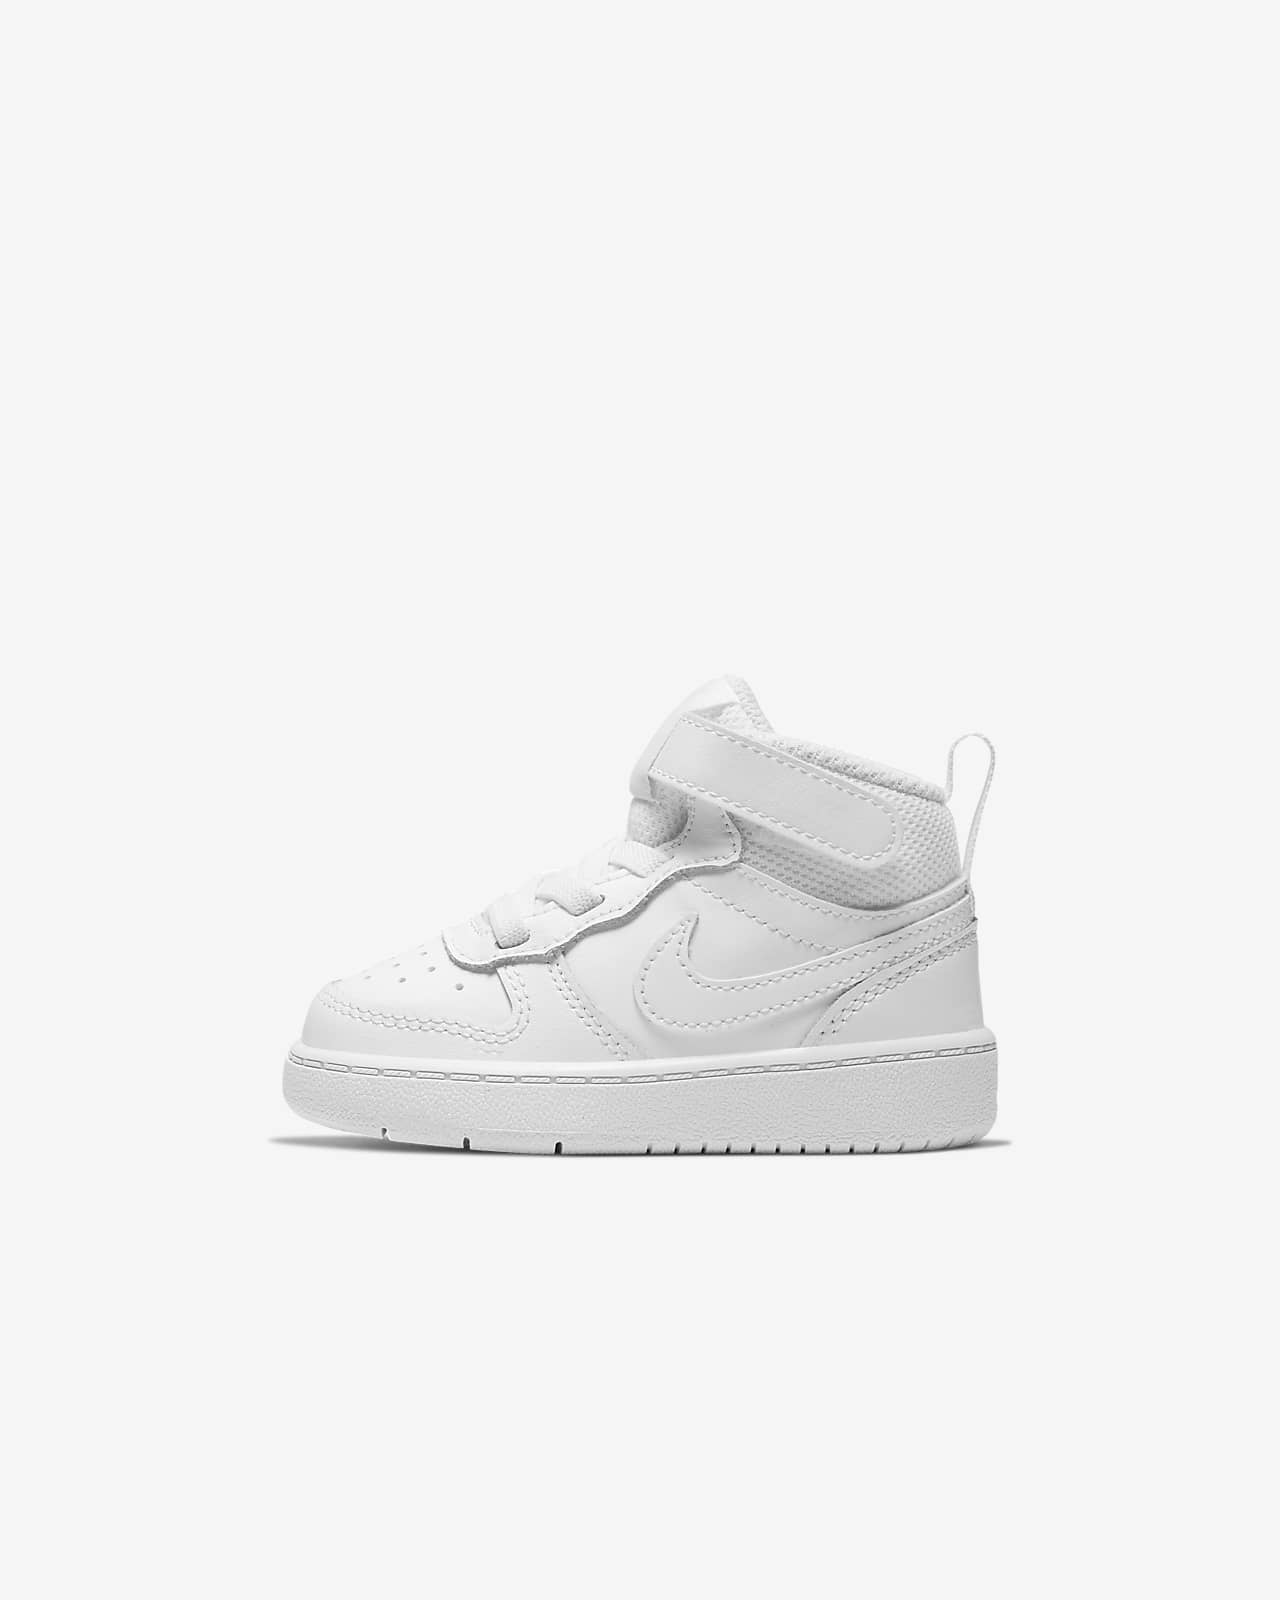 Nike Court Borough Mid 2 Baby and Toddler Shoe